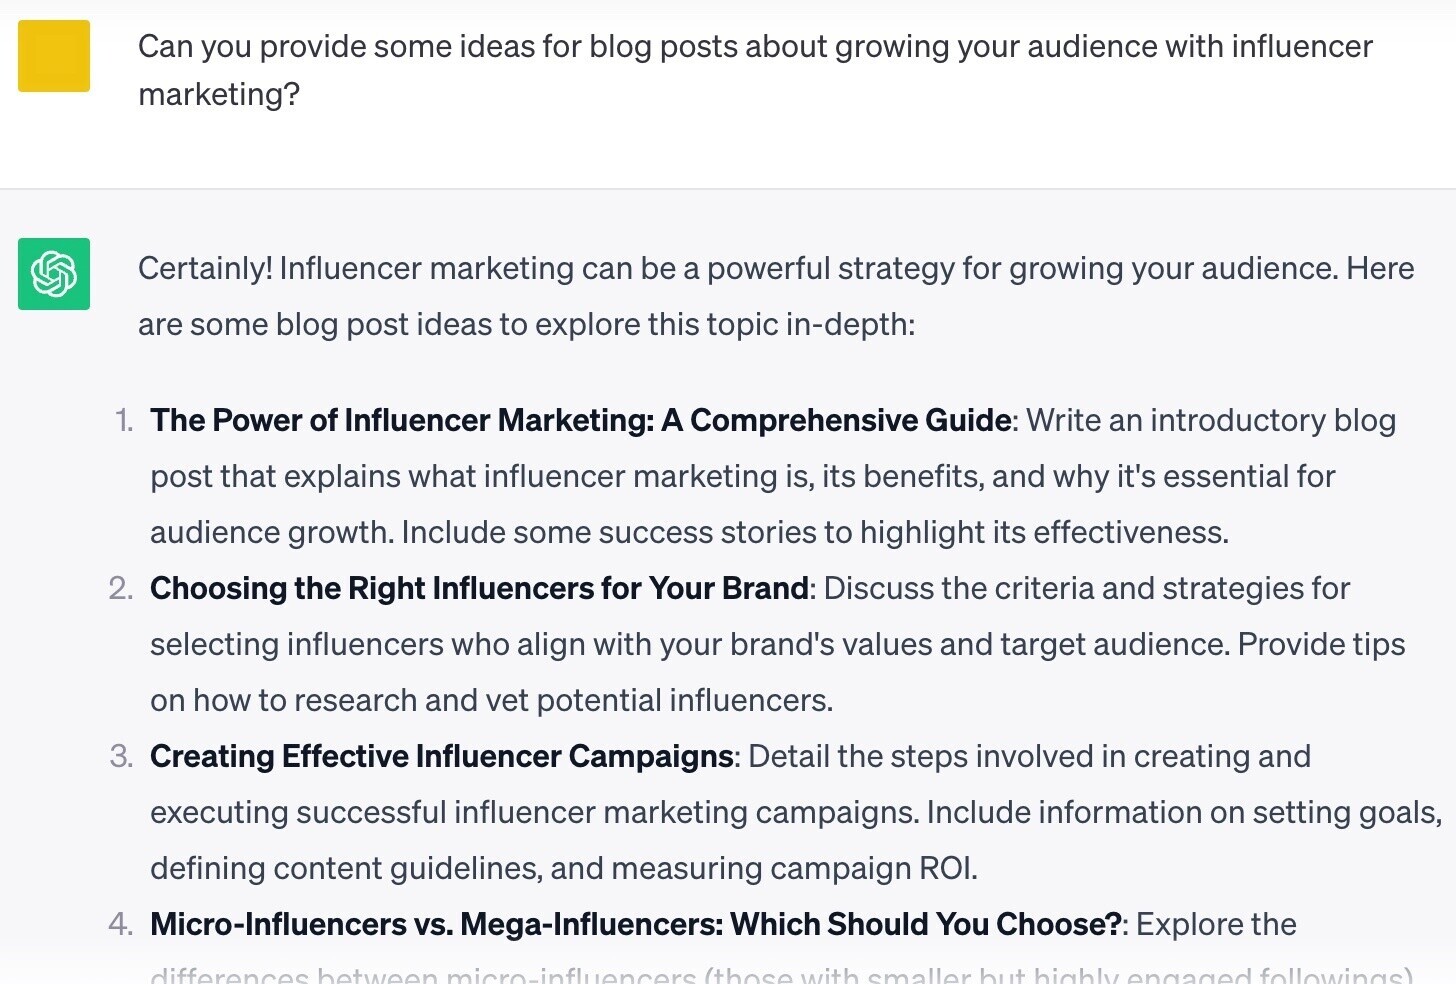 ChatGPT response to “Can you provide some ideas for blog posts about growing your audience with influencer marketing?” prompt